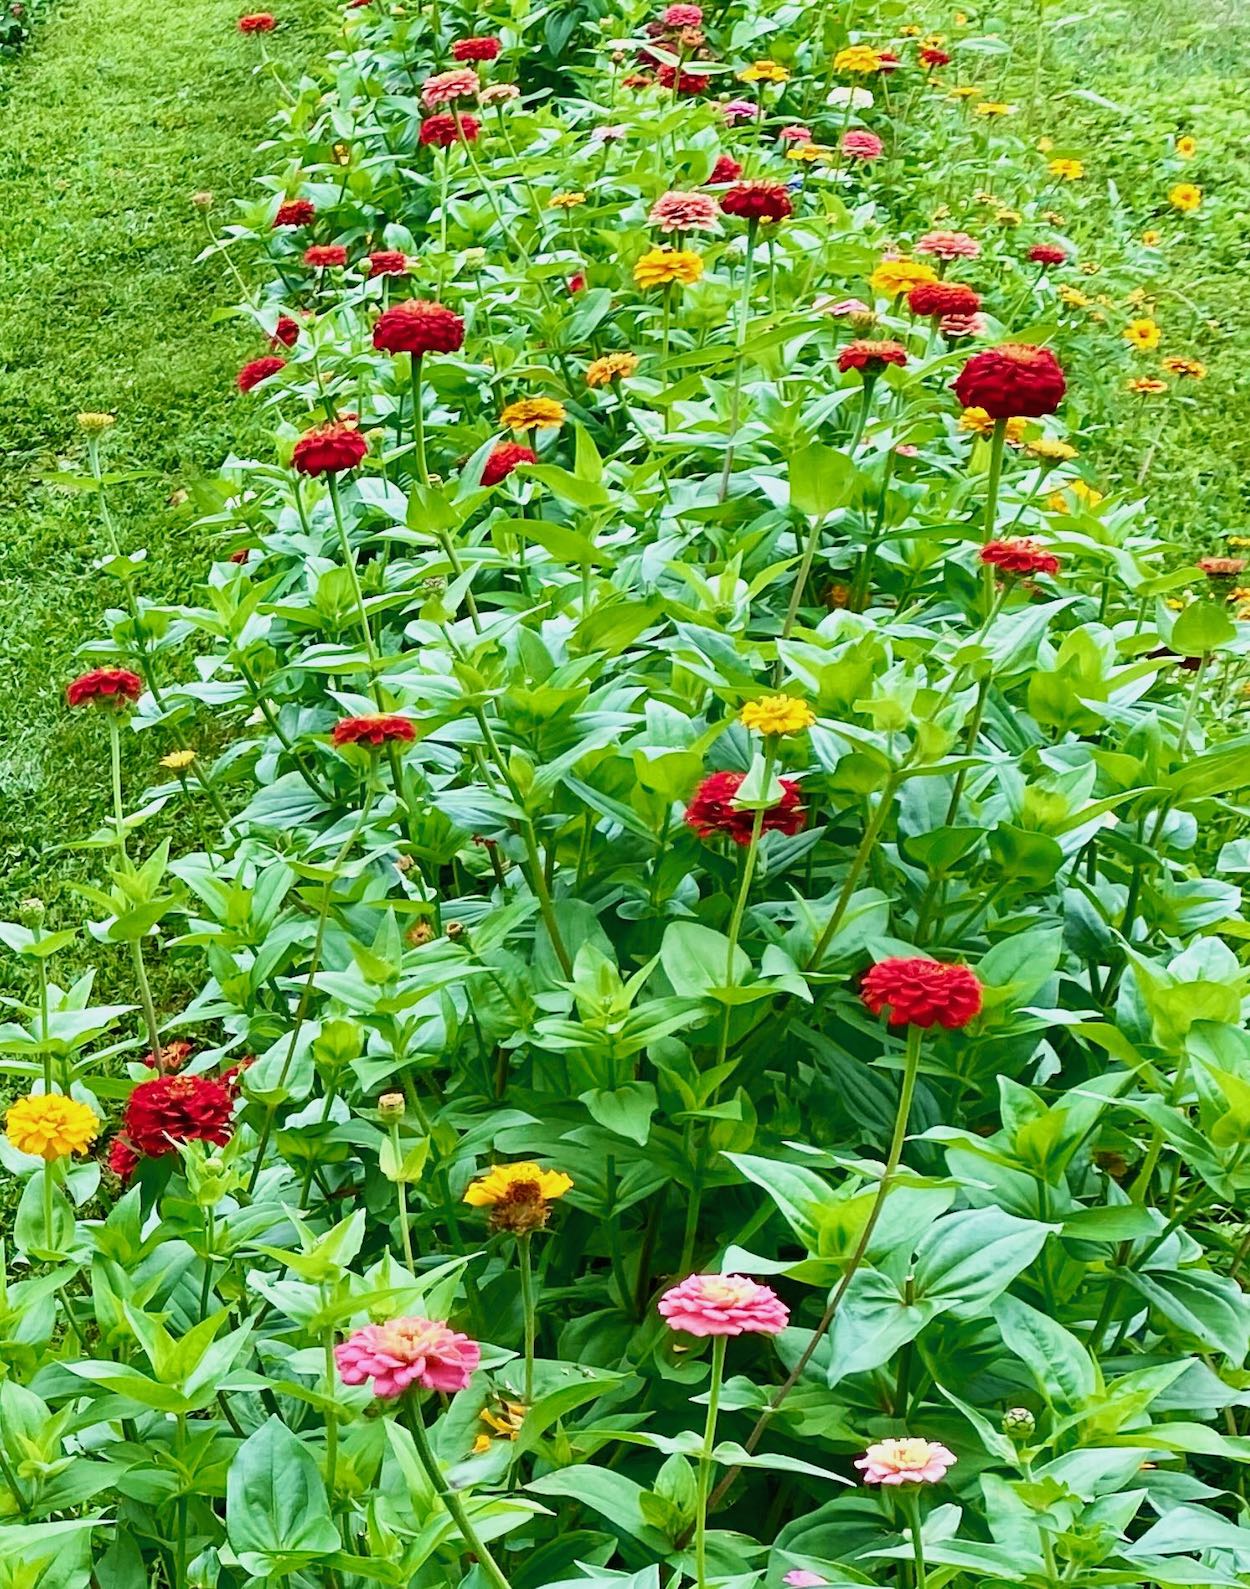 It's the weekend! Number 309, Row of Zinnias at a Martha's Vineyard Farm